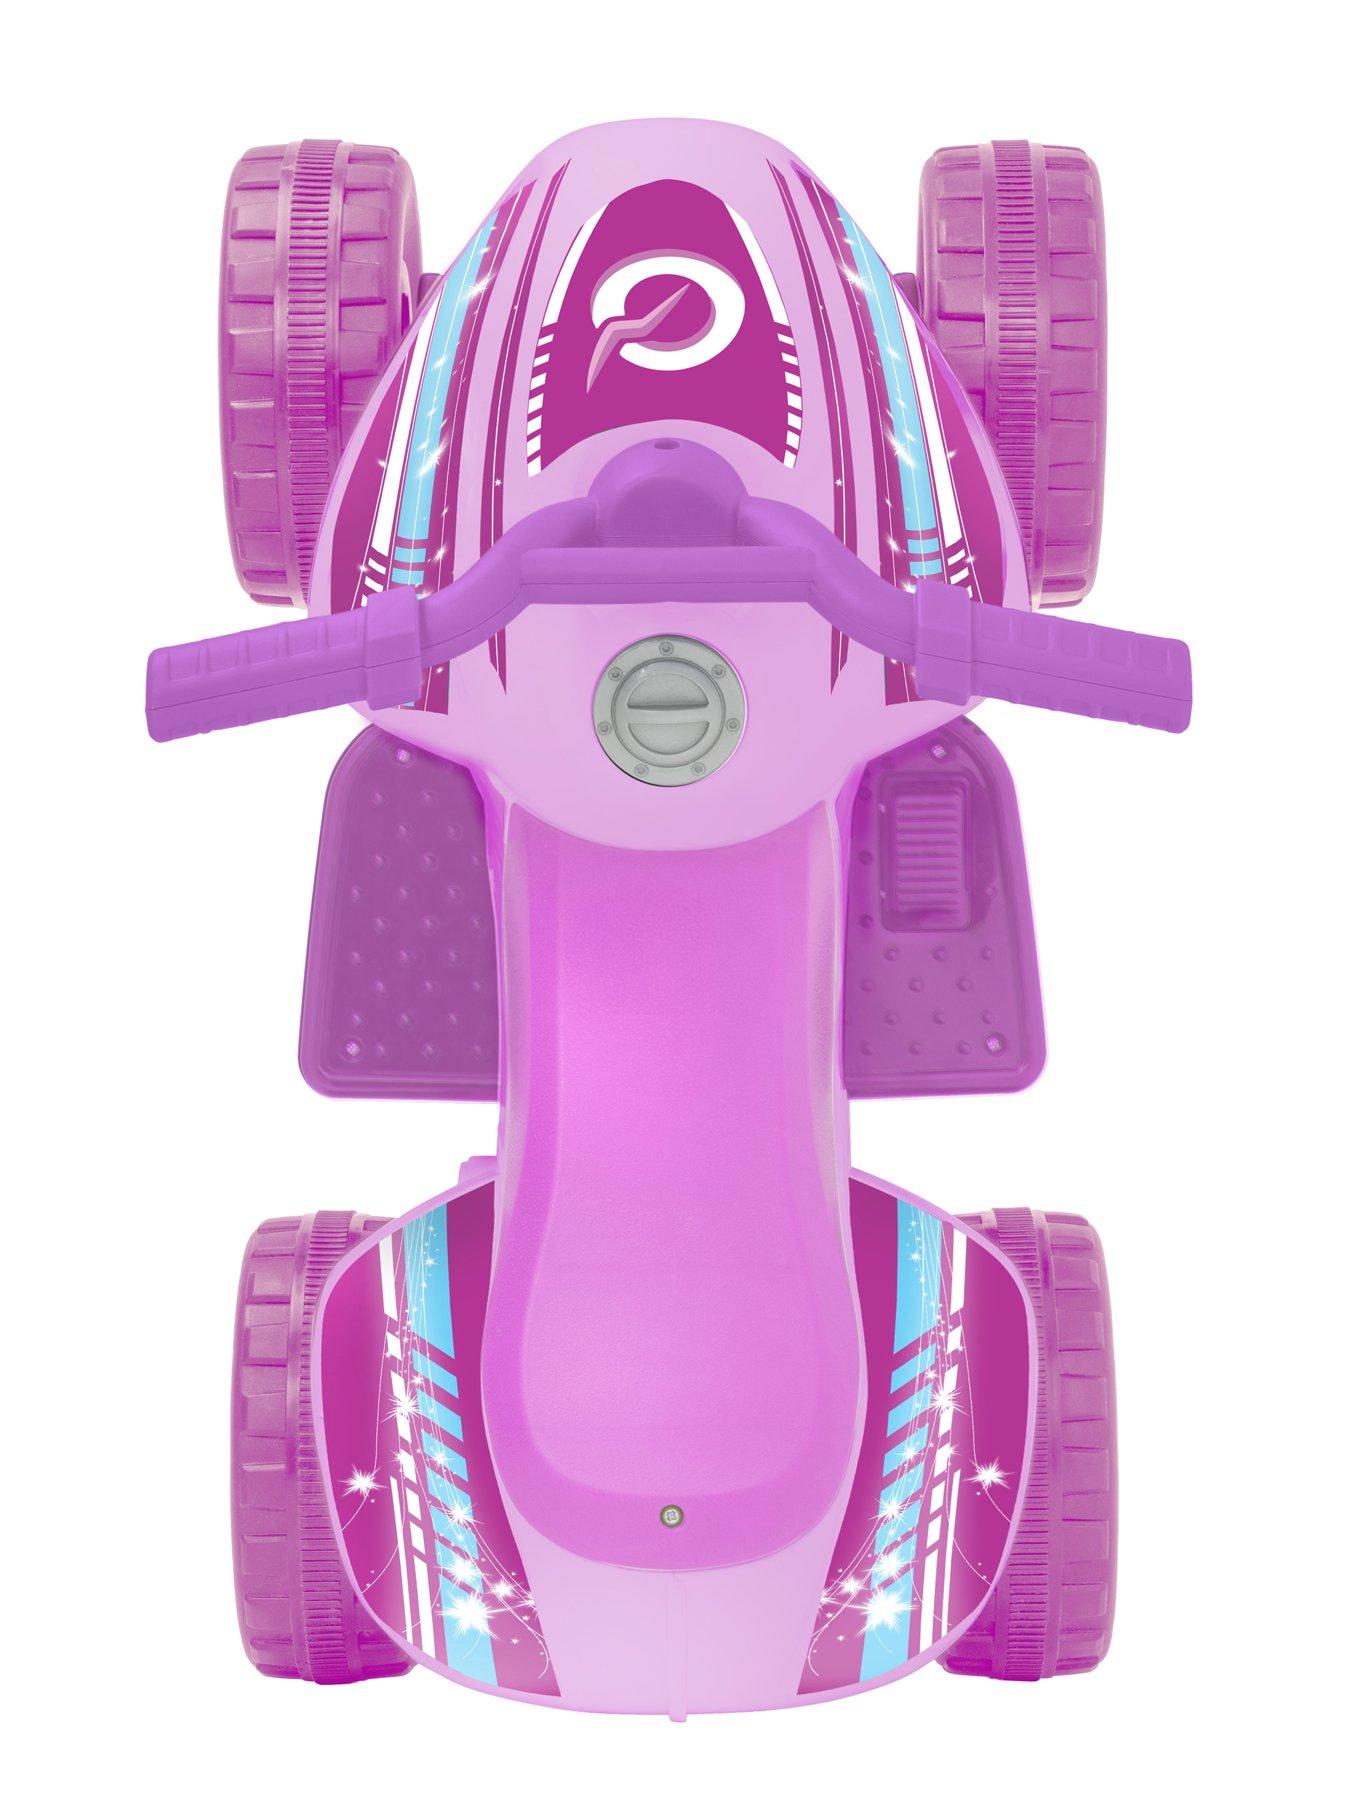  A2Z 4 Kids Boys Girls Pedal Power Print - T.S Pedal Power Black  & Neon Pink 5-6.: Clothing, Shoes & Jewelry